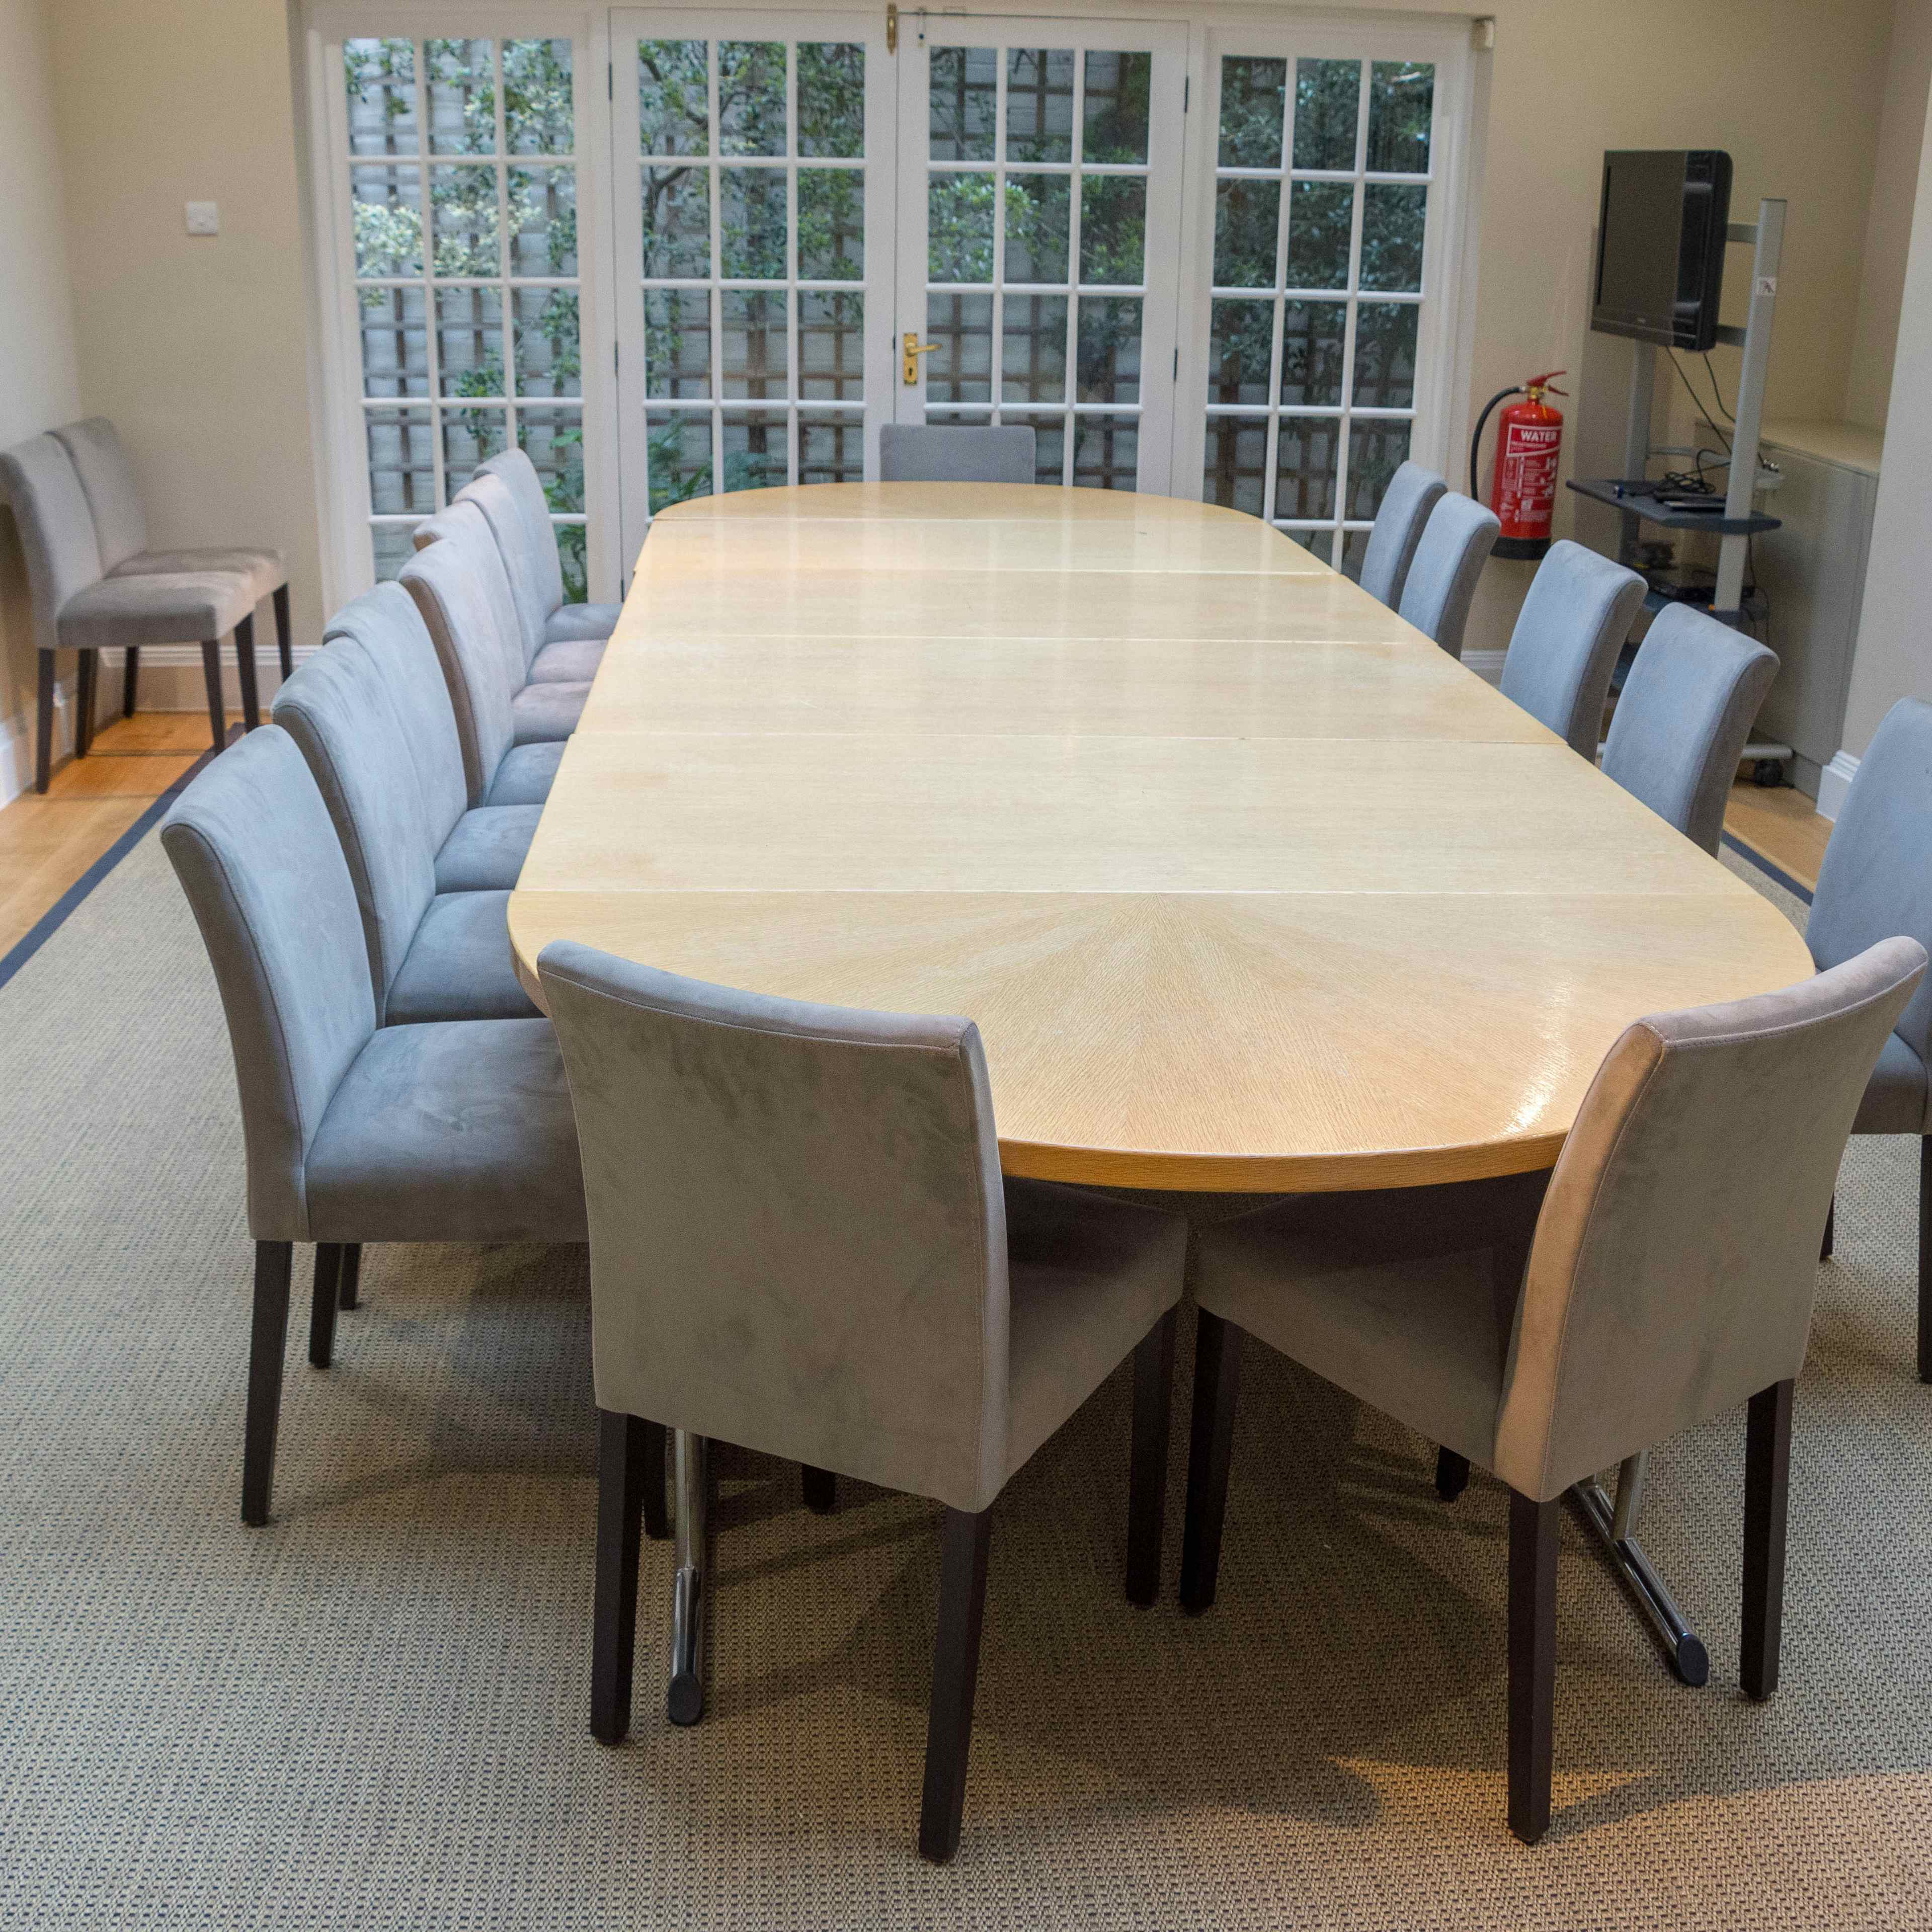 Centre for Policy Studies - Boardroom image 3